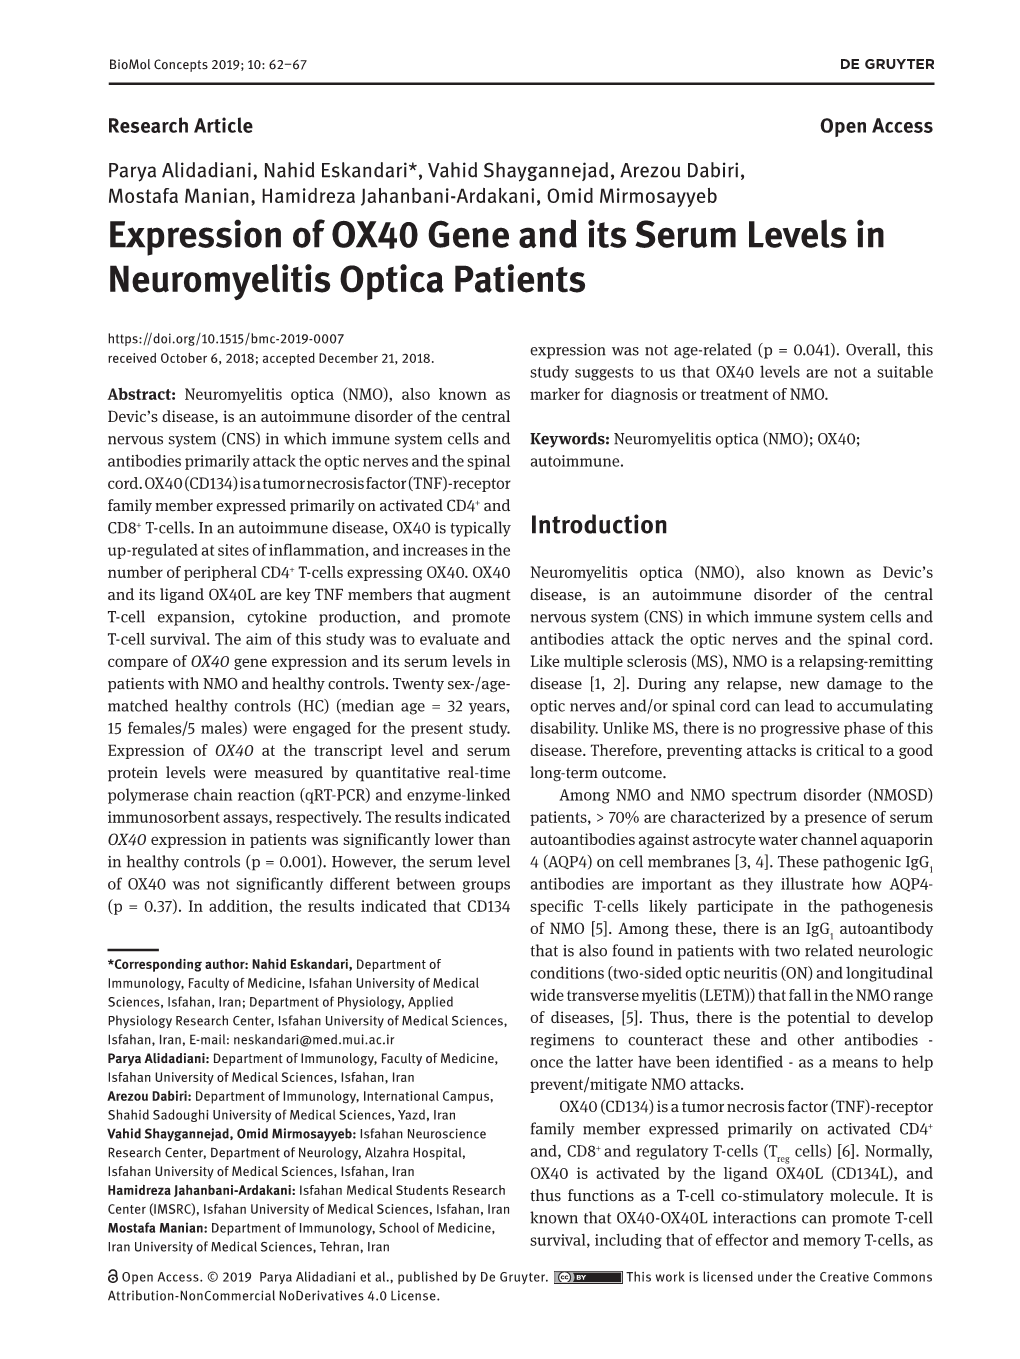 Expression of OX40 Gene and Its Serum Levels in Neuromyelitis Optica Patients 63